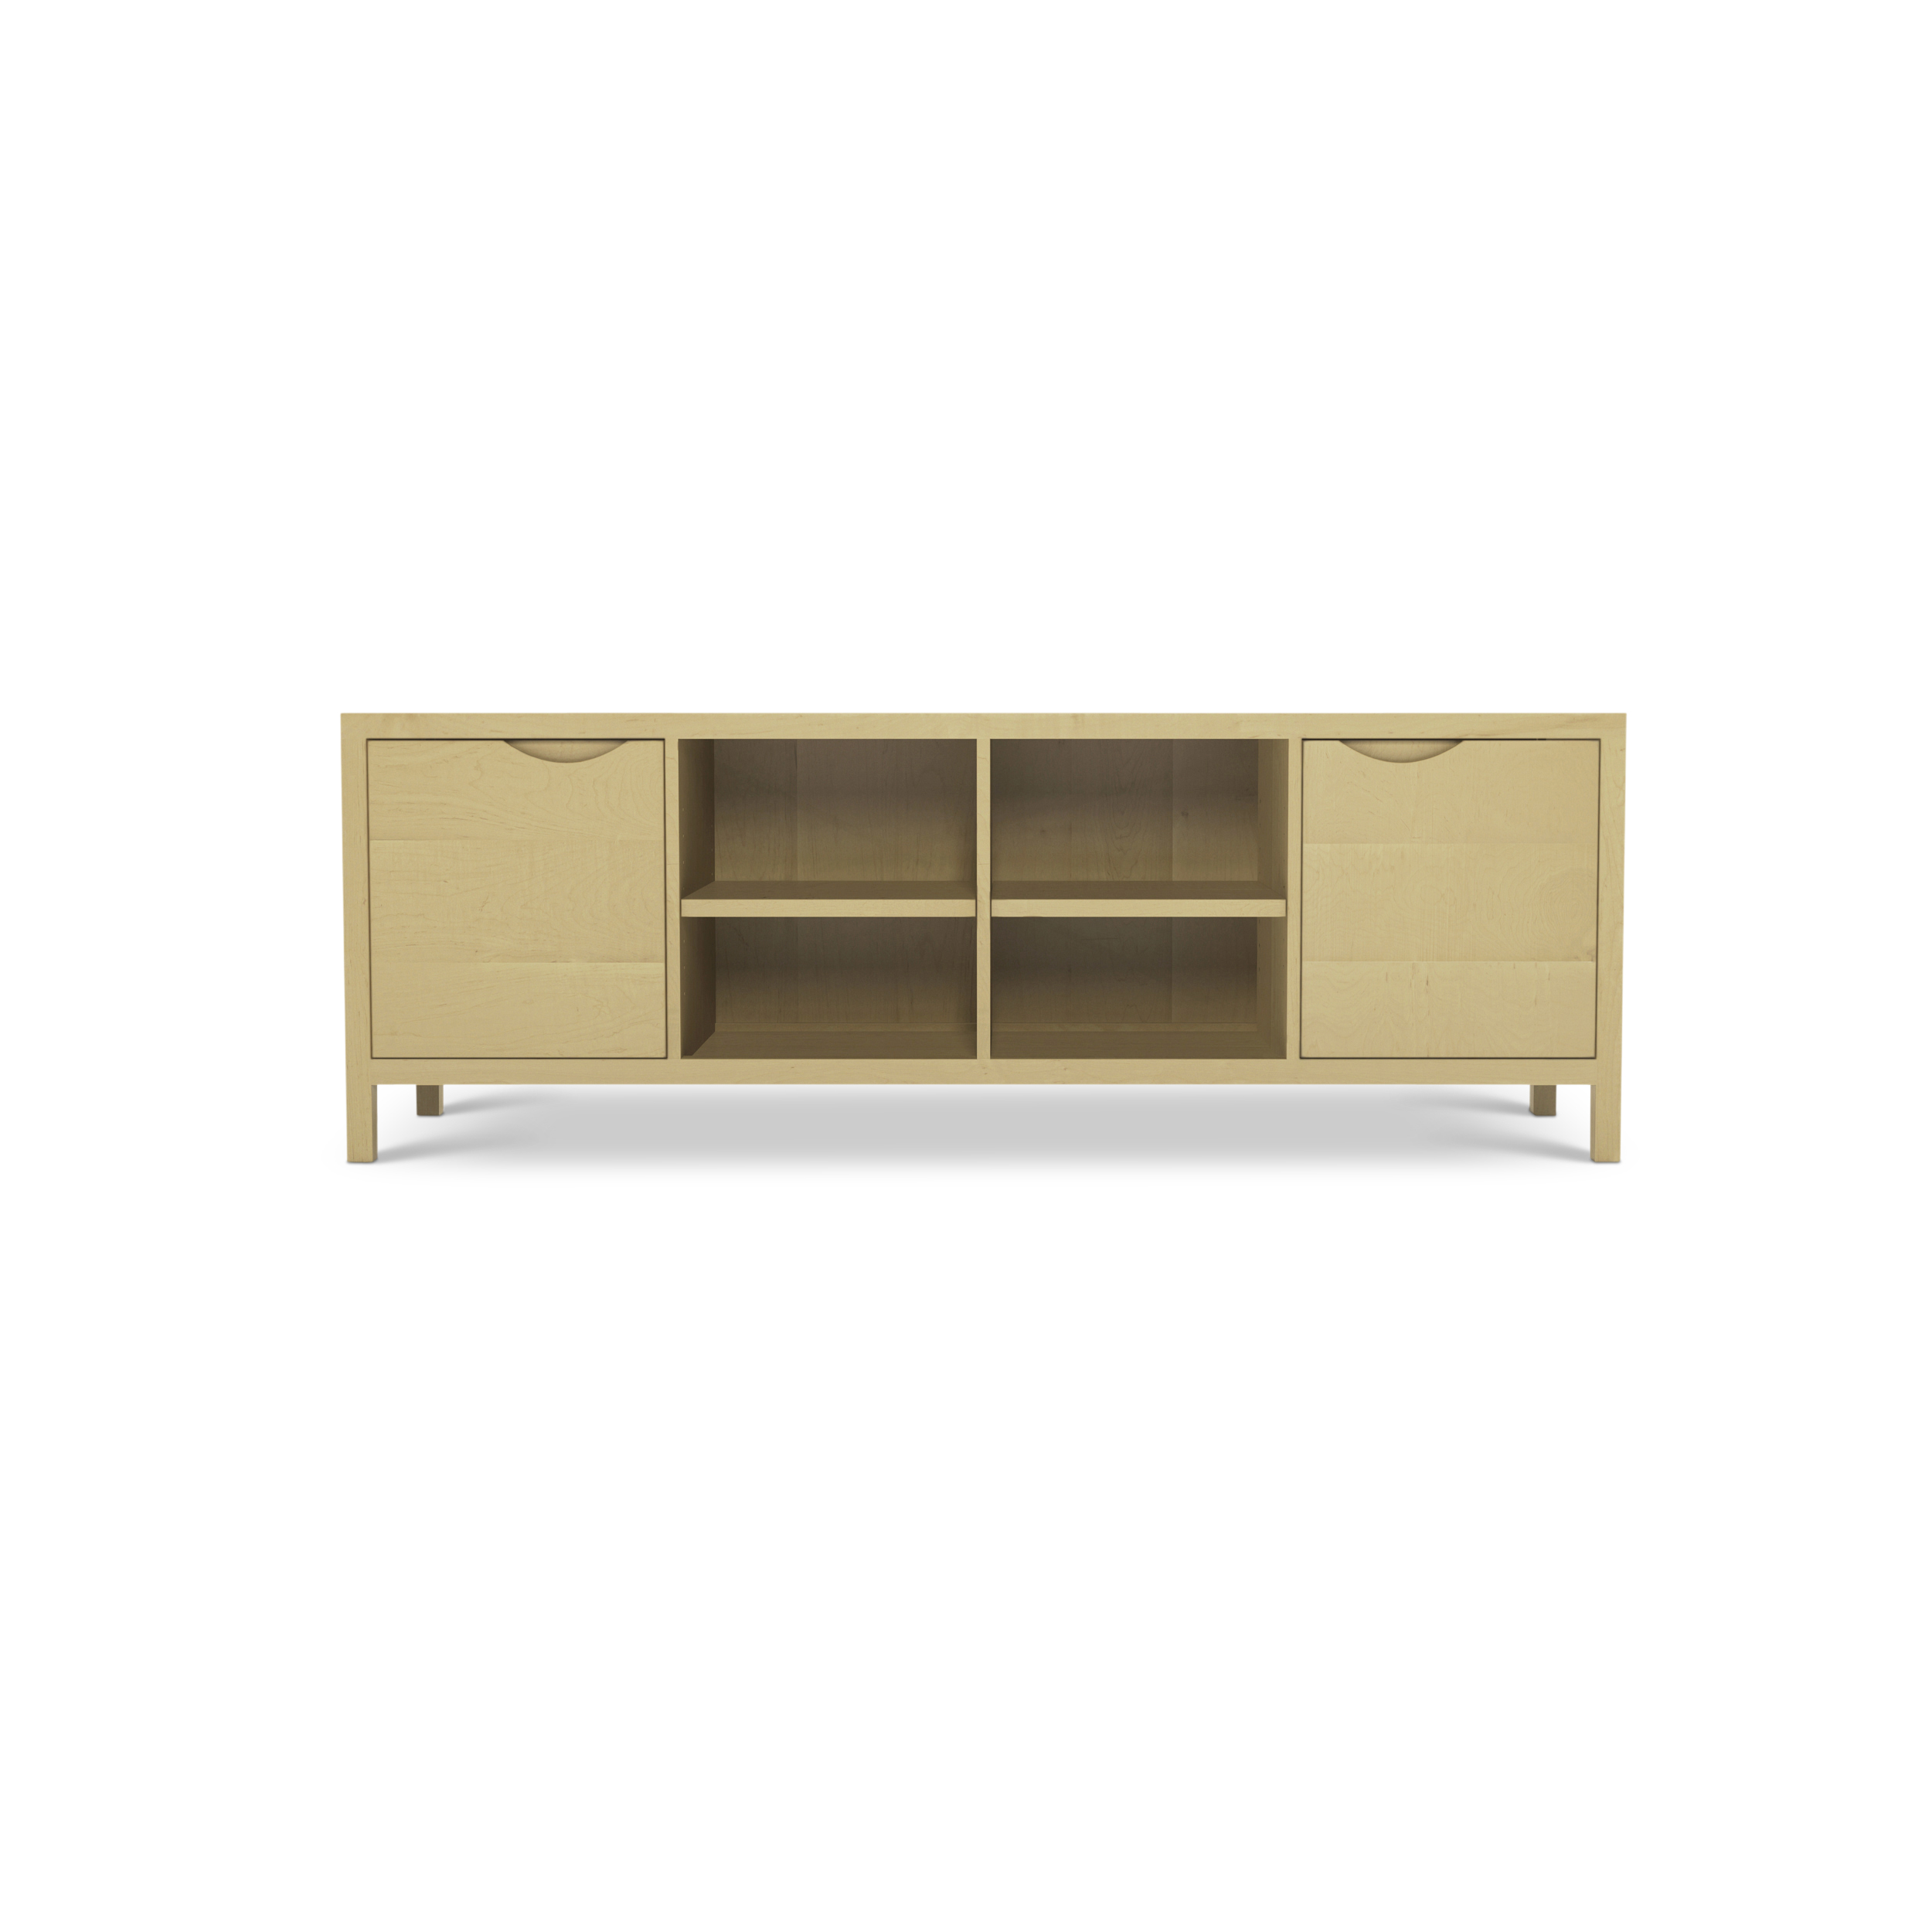 Series 353 Media Cabinet With Two Doors At 72″ In Width